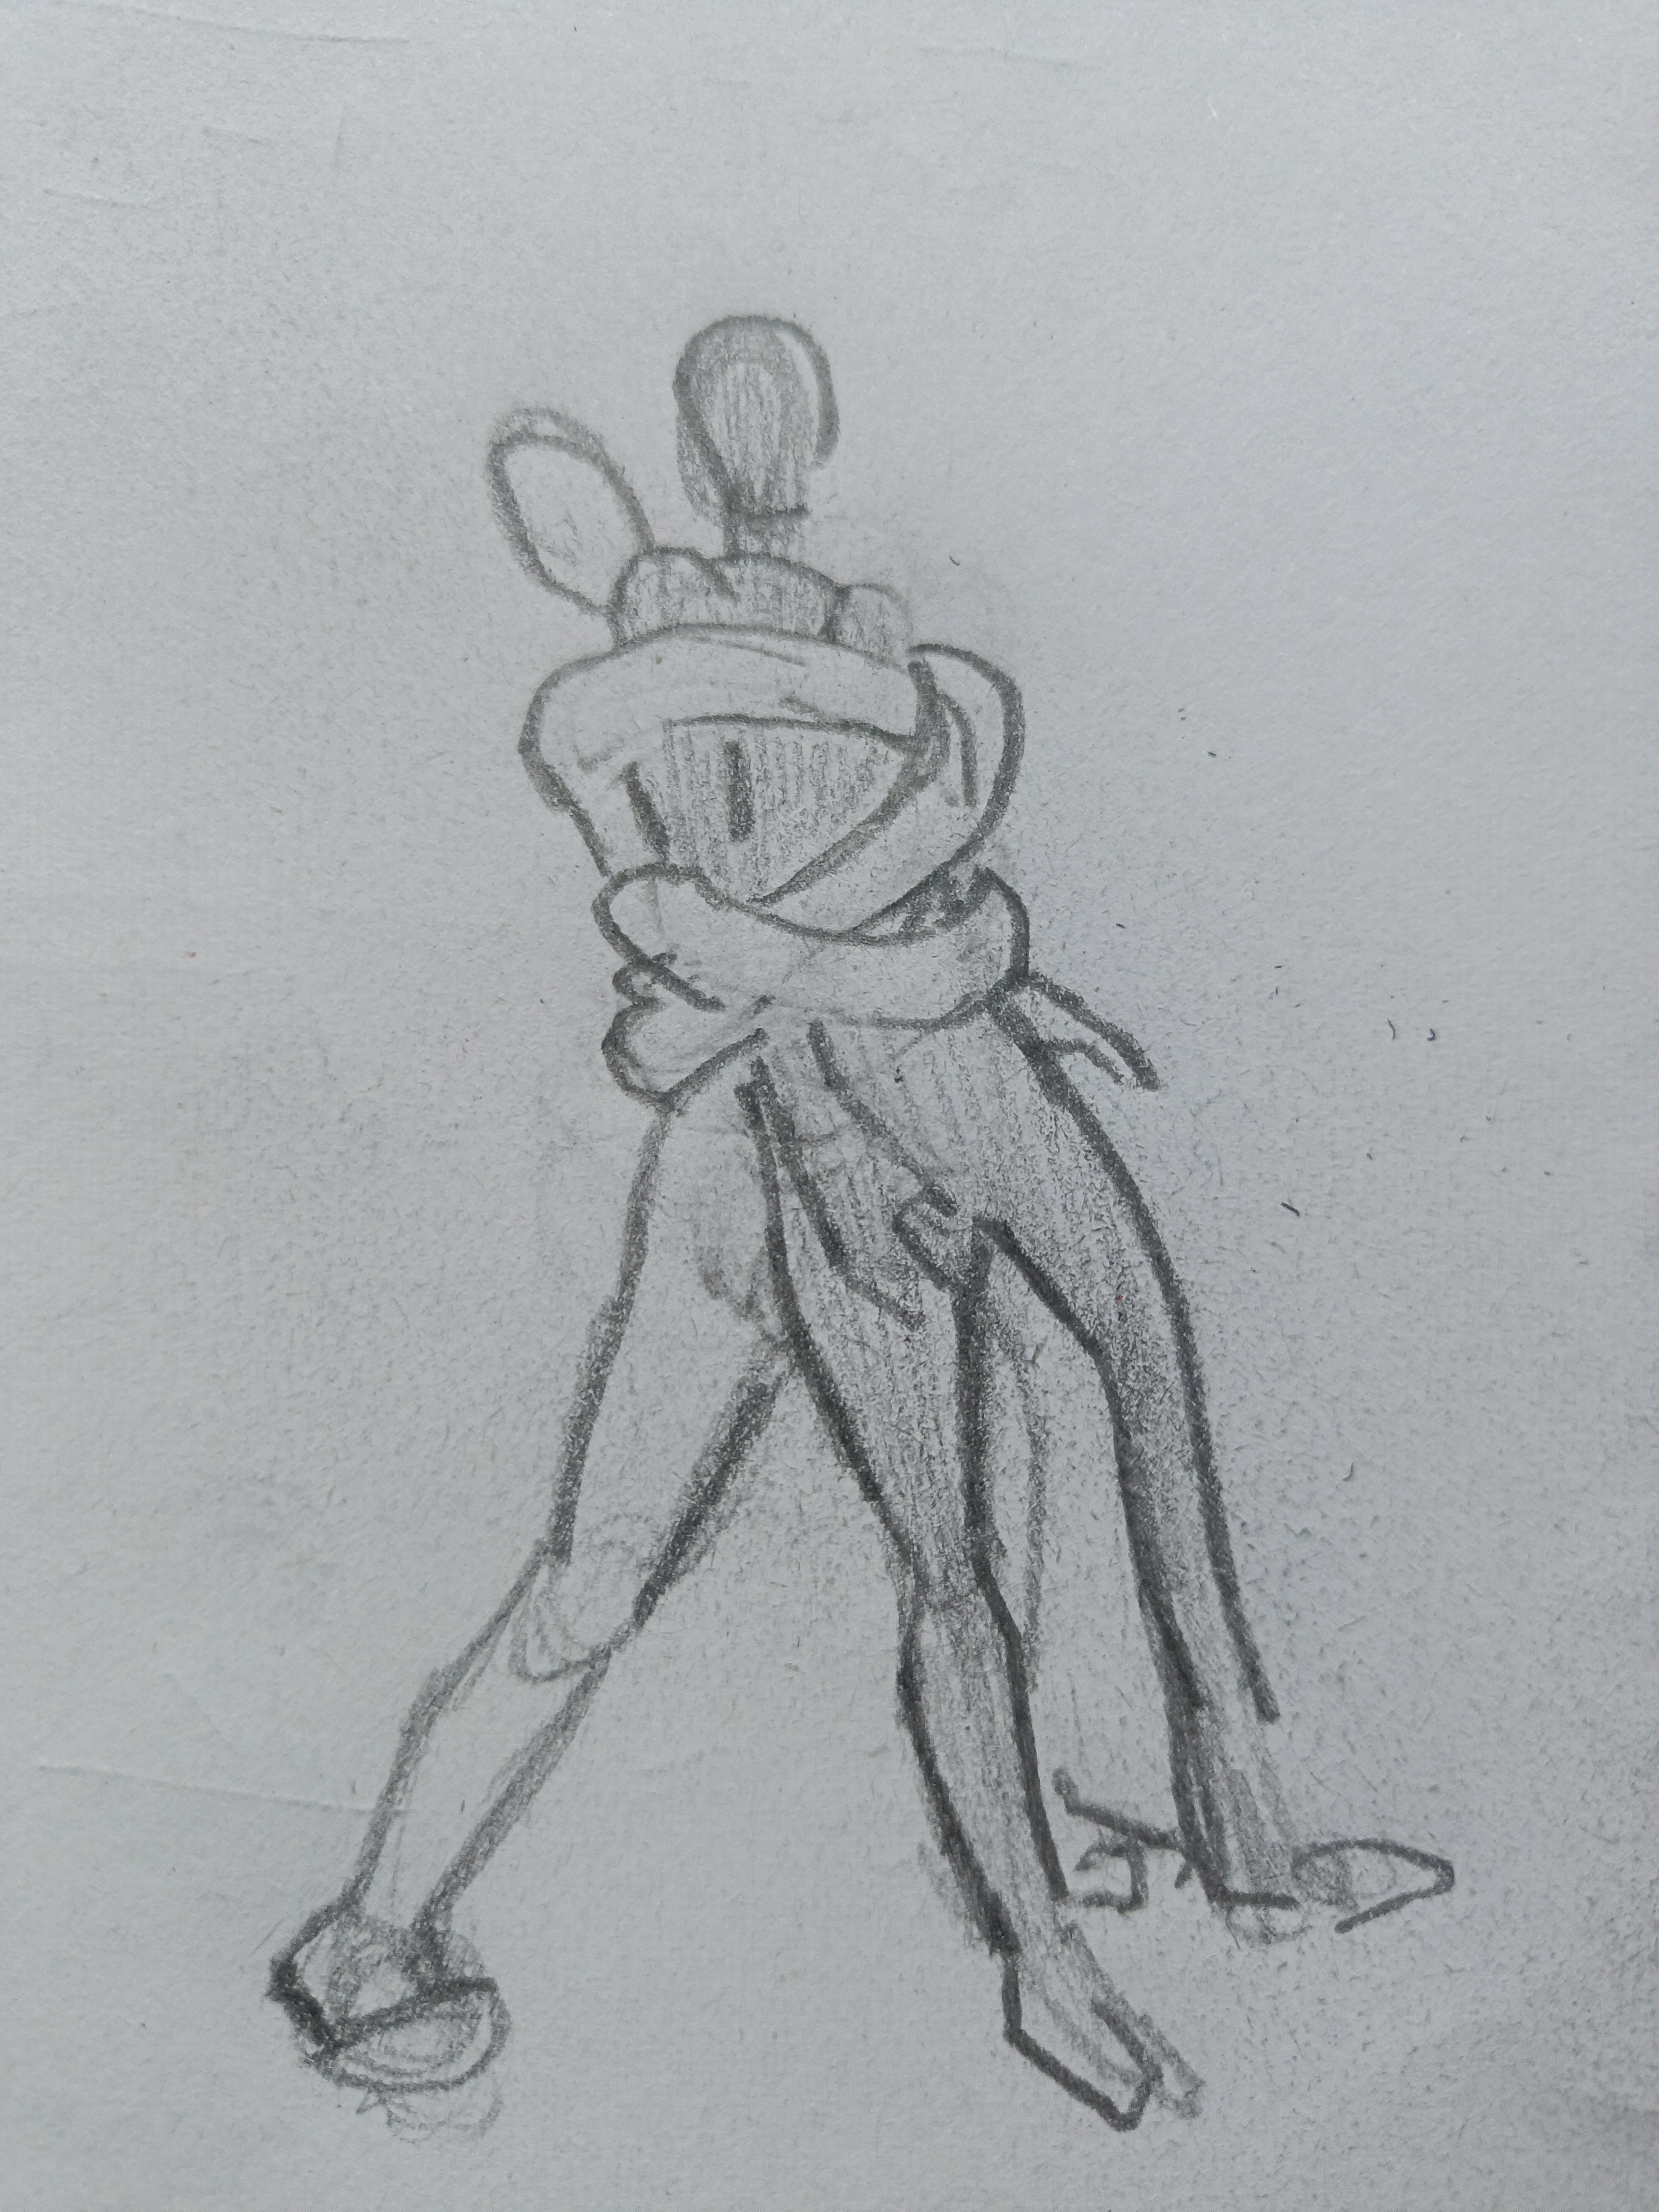 simplistic drawing of the long armed woman grabbing someone from behond with her armes wrapped twice around them